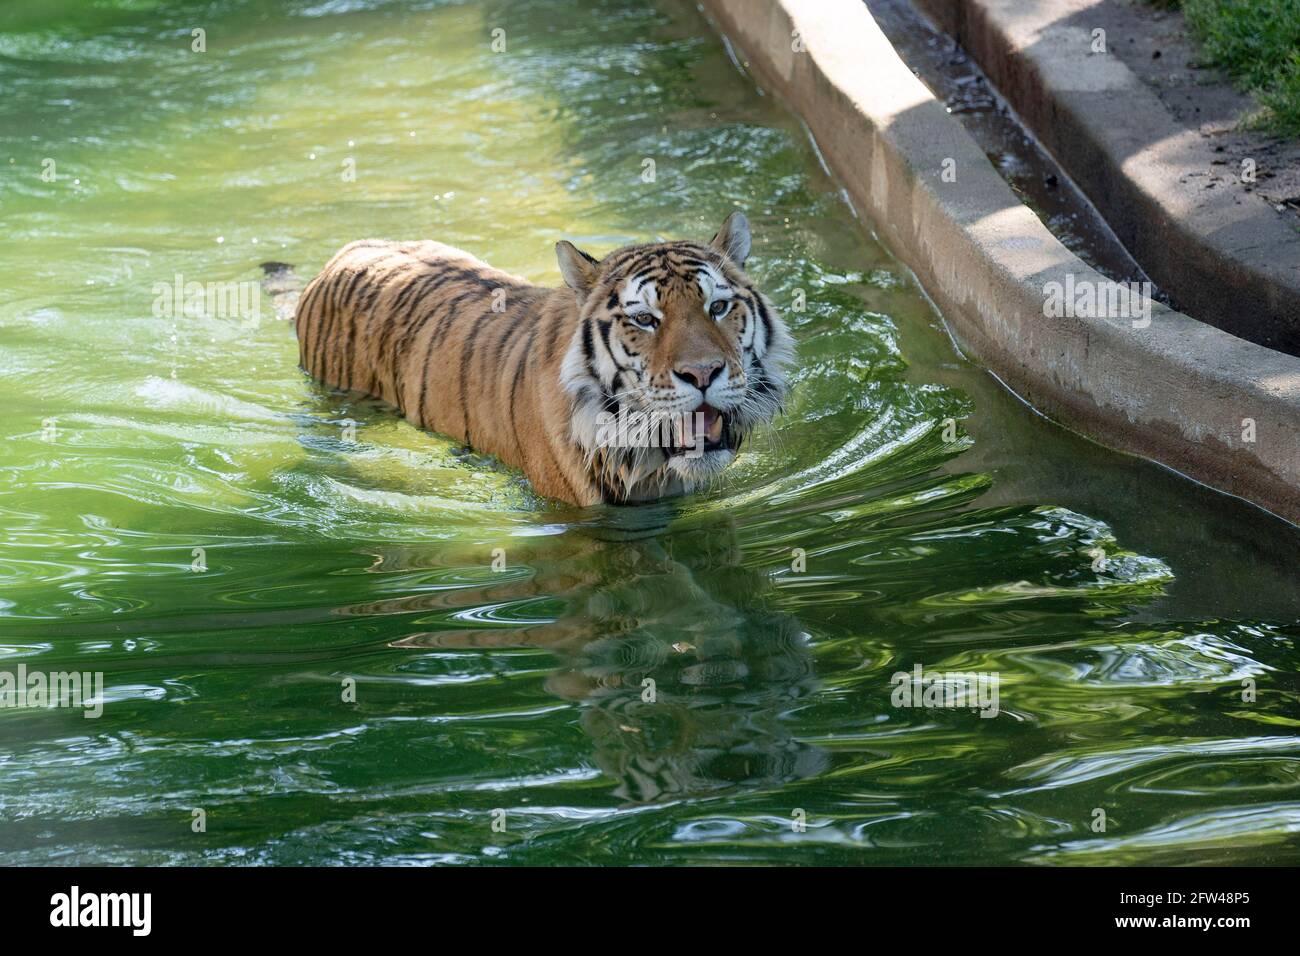 Washington, USA. 21st May, 2021. Photo taken on May 21, 2021 shows a tiger  at Smithsonian's National Zoo in Washington, DC, the United States. The Smithsonian's  National Zoo reopened in Washington, DC